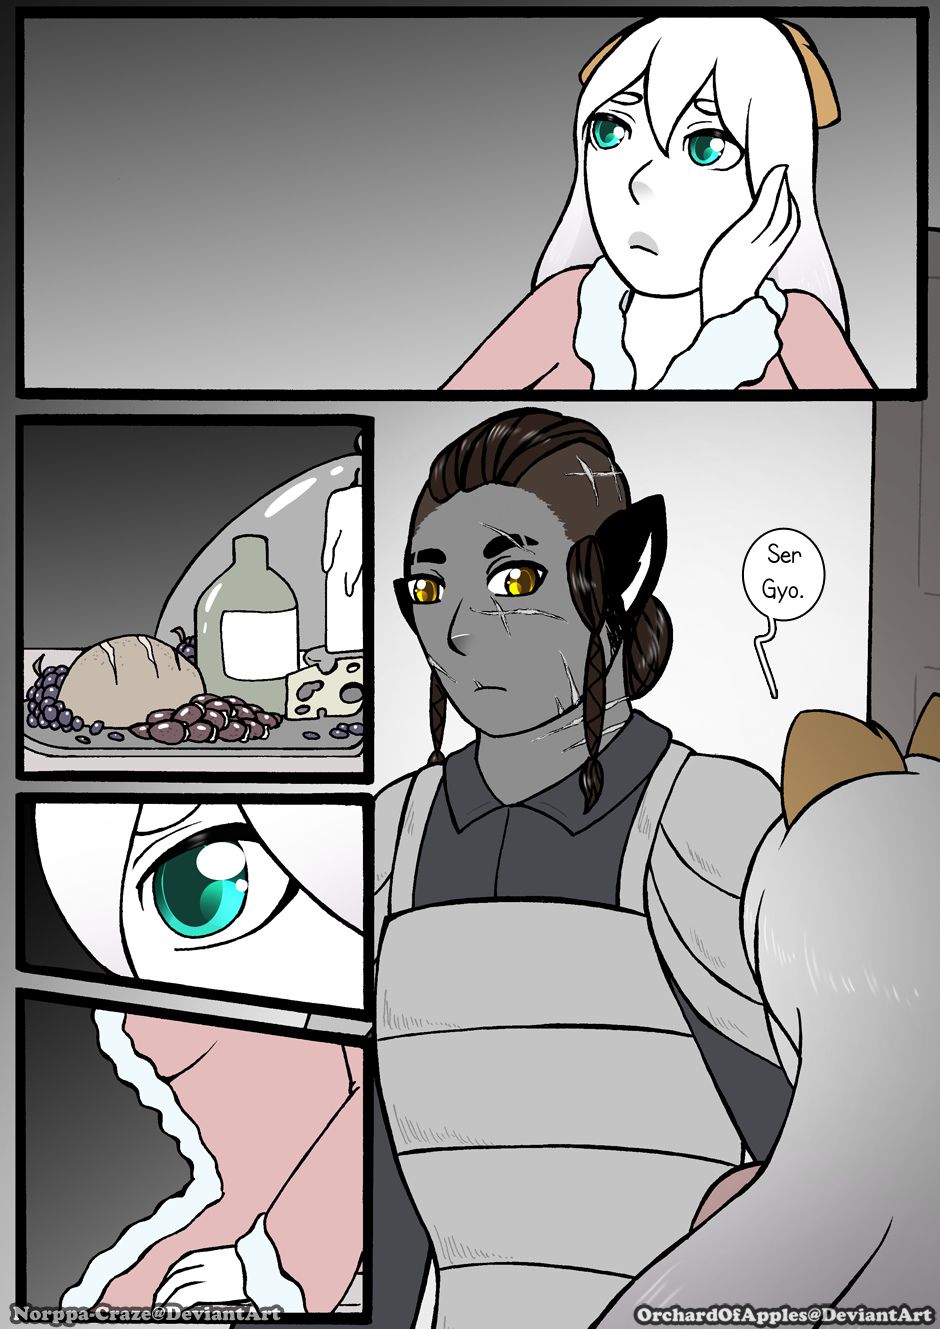 [Jeny-jen94] Between Kings and Queens [Ongoing] 304